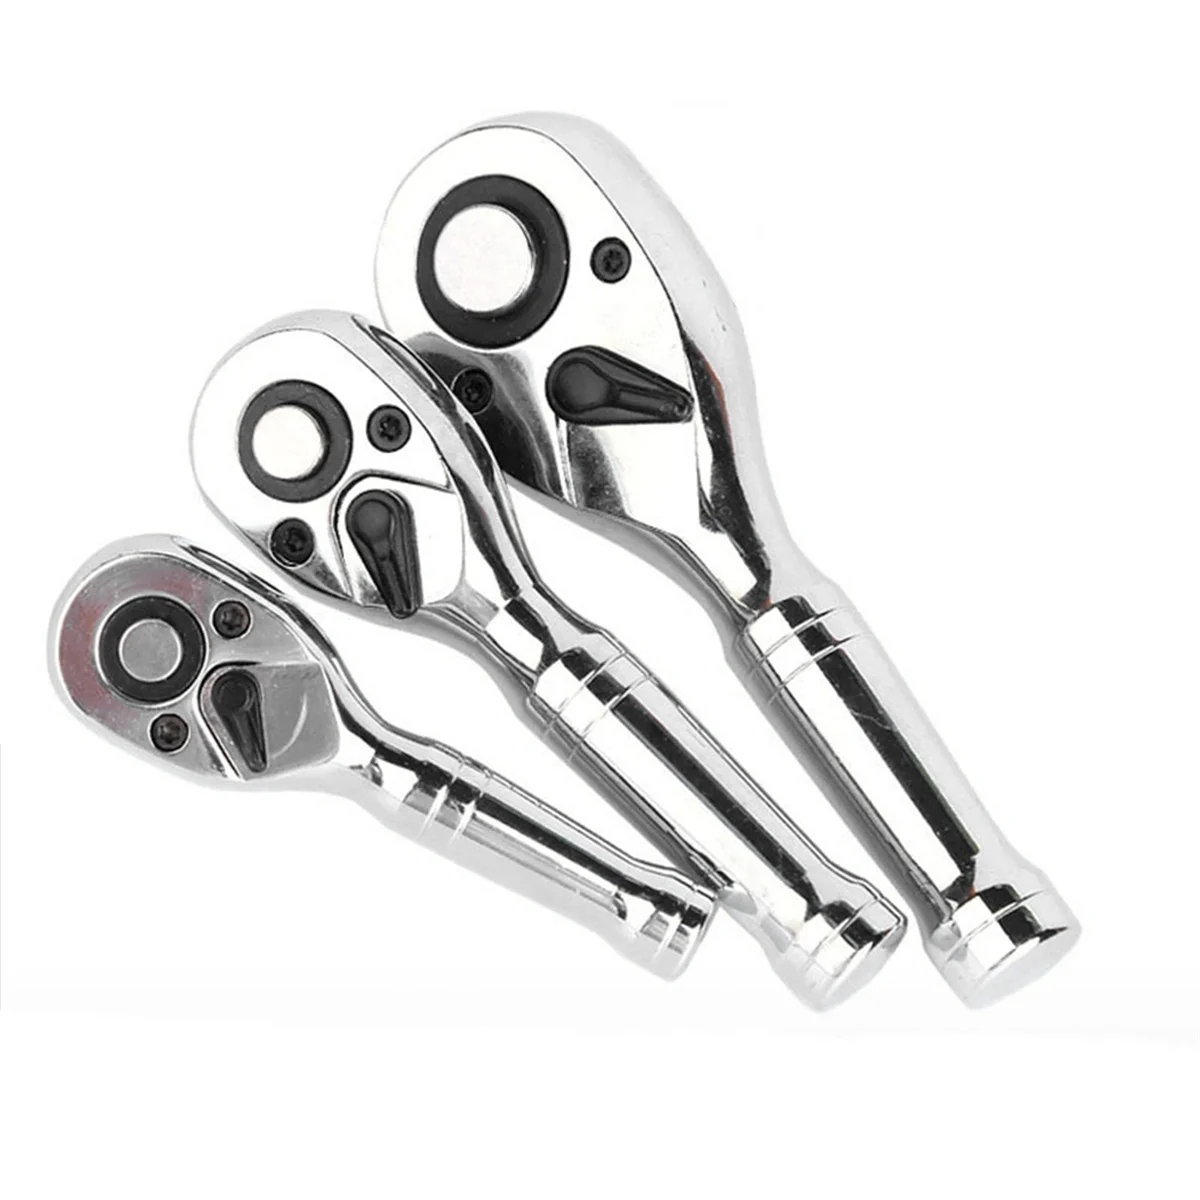 

1/4In 3/8In 1/2In Mini Ratchet Wrench 72 Teeth Spanner Portable Torque Wrenches Quick Socket Ratchet Wrench Hand Tools